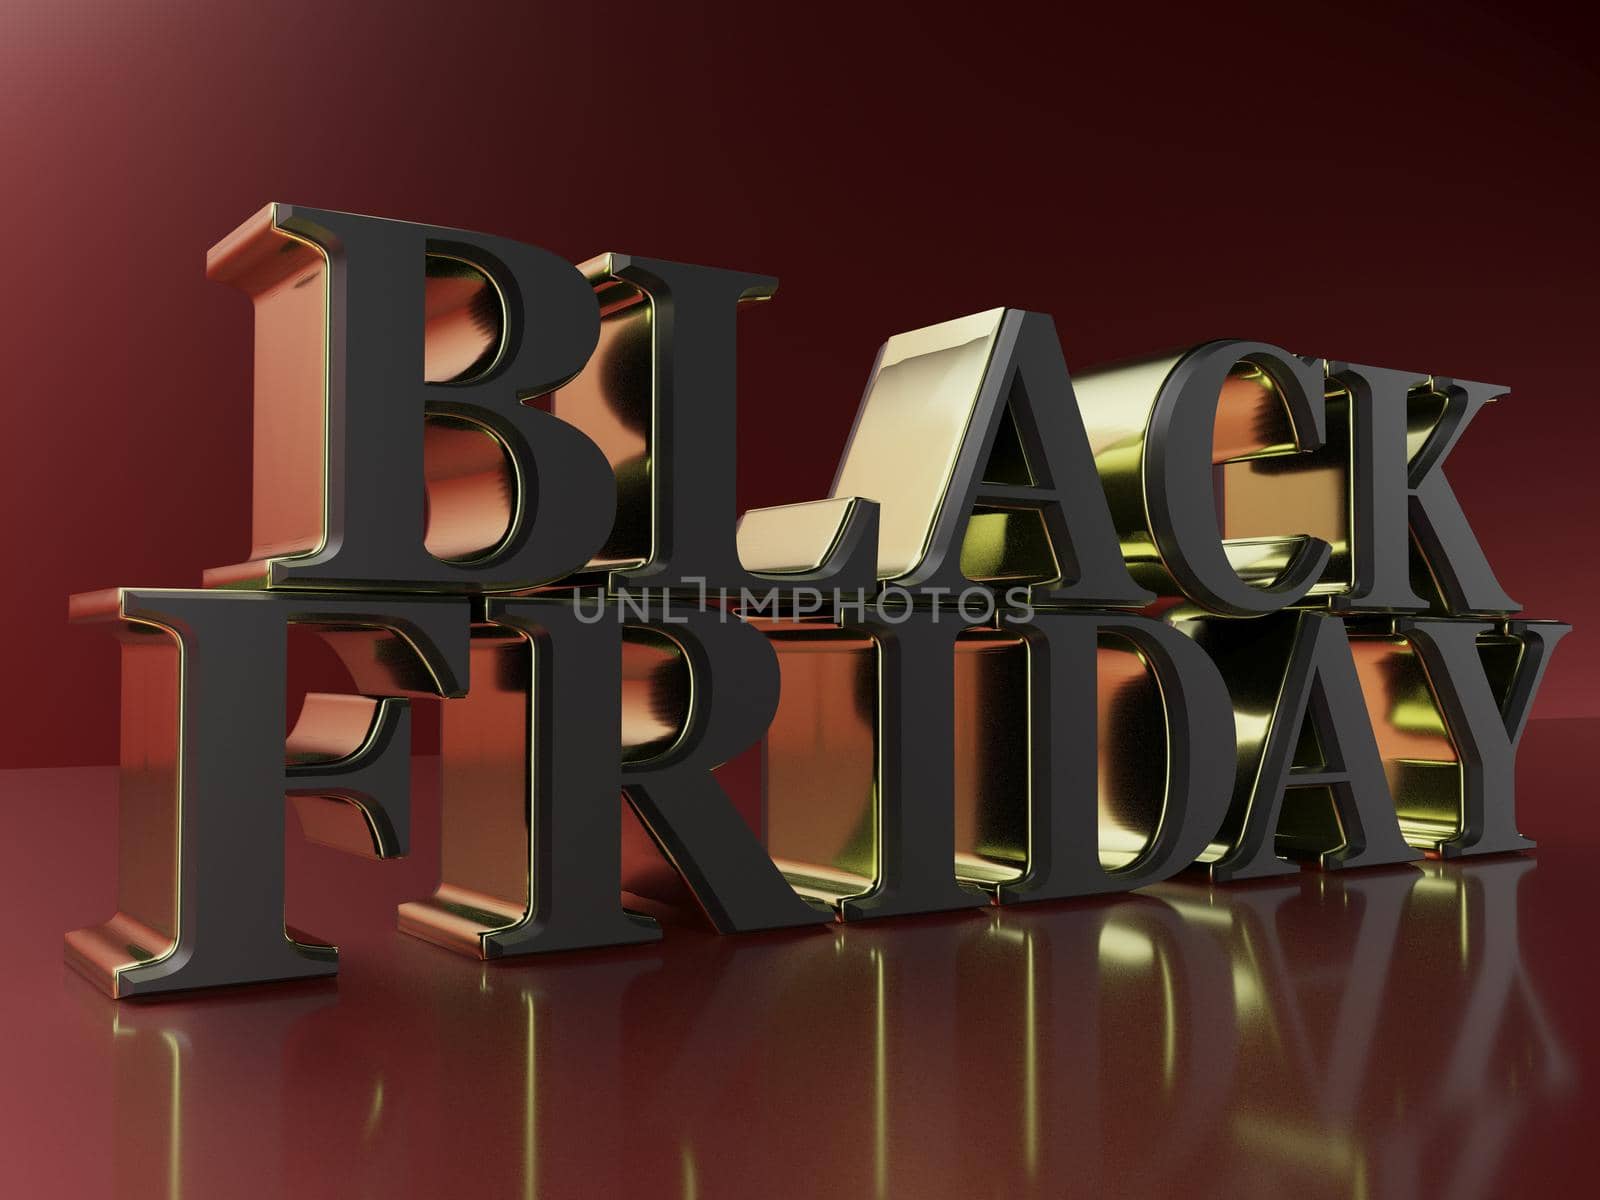 the words Black friday in 3d rendering by raphtong